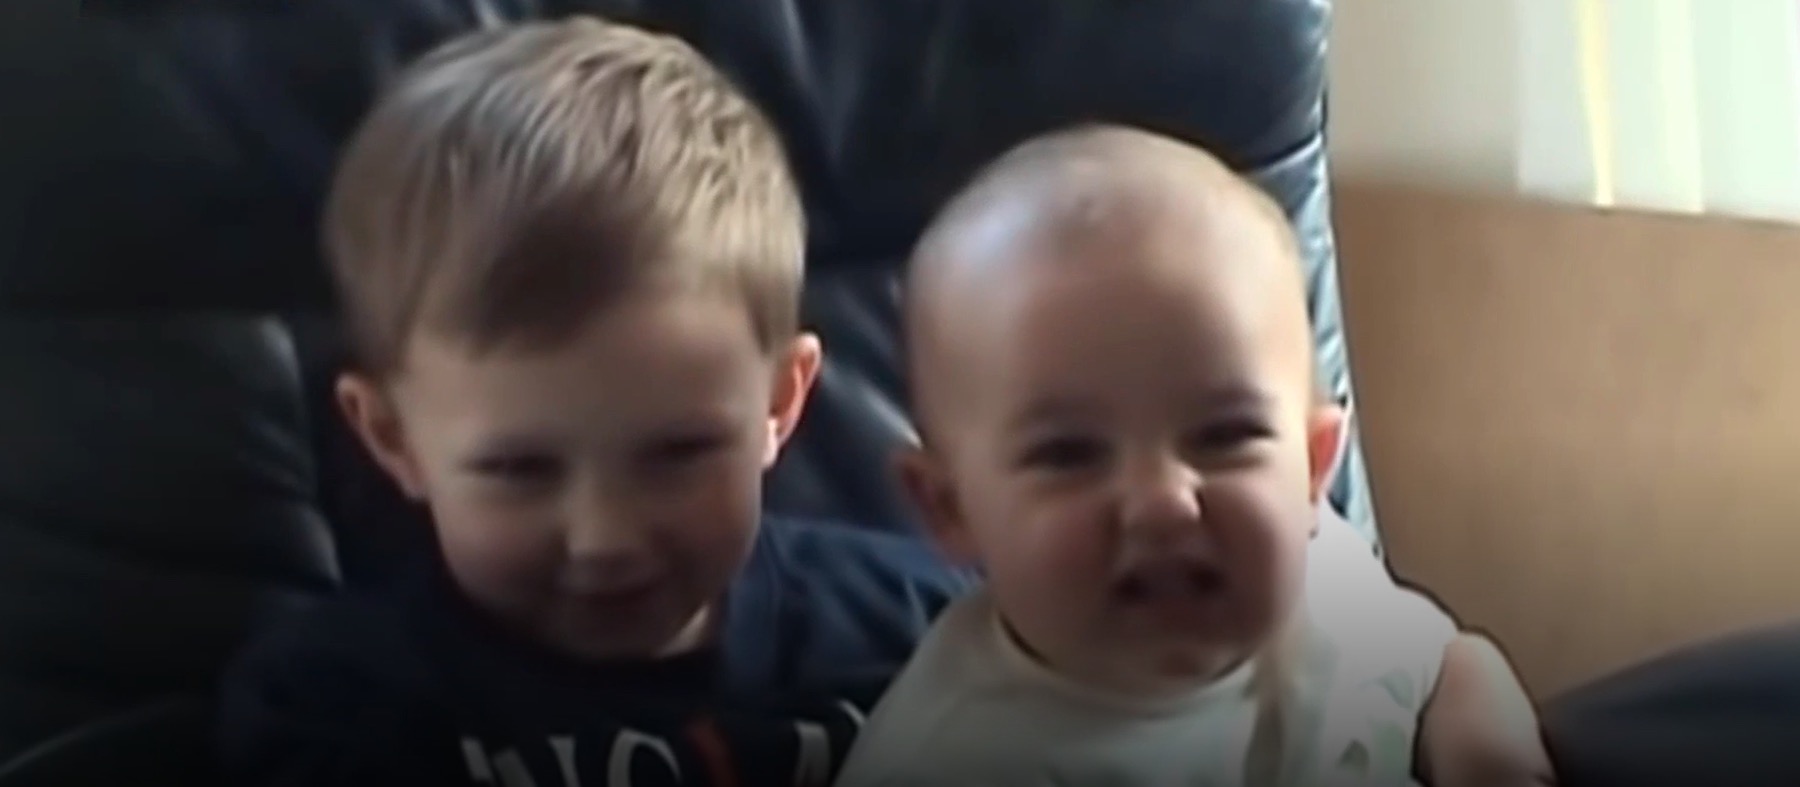 Harry Davies-Carr and Charlie Davies-Carr as children in the Charlie Bit My Finger viral video